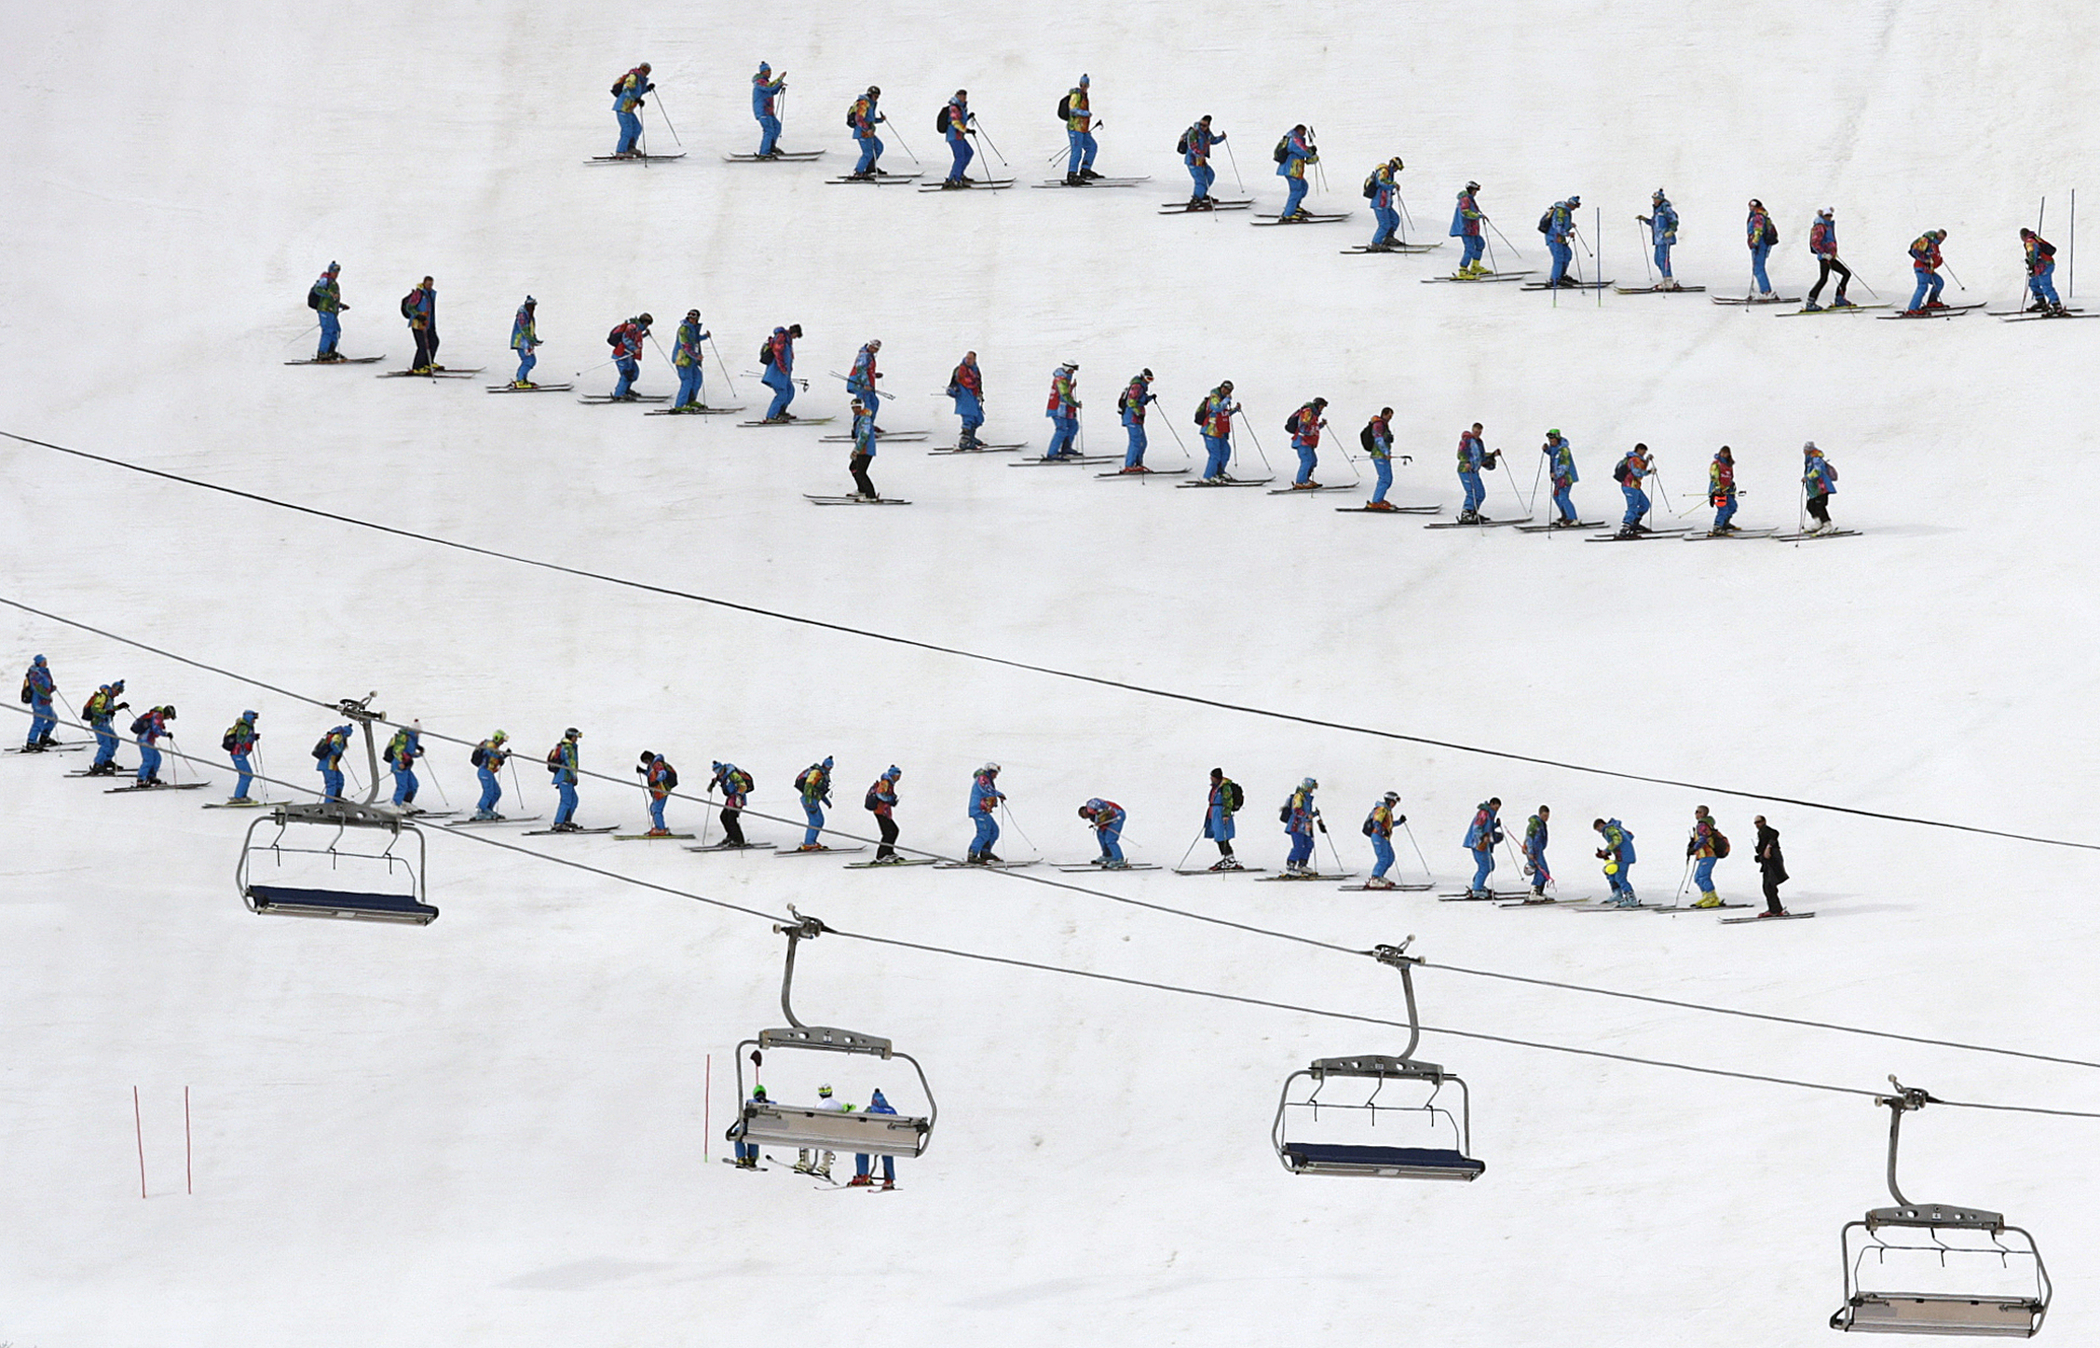 Slippers prepare the course ahead of the slalom portion of the men's supercombined at the Sochi 2014 Winter Olympics, Friday, Feb. 14, 2014, in Krasnaya Polyana, Russia.